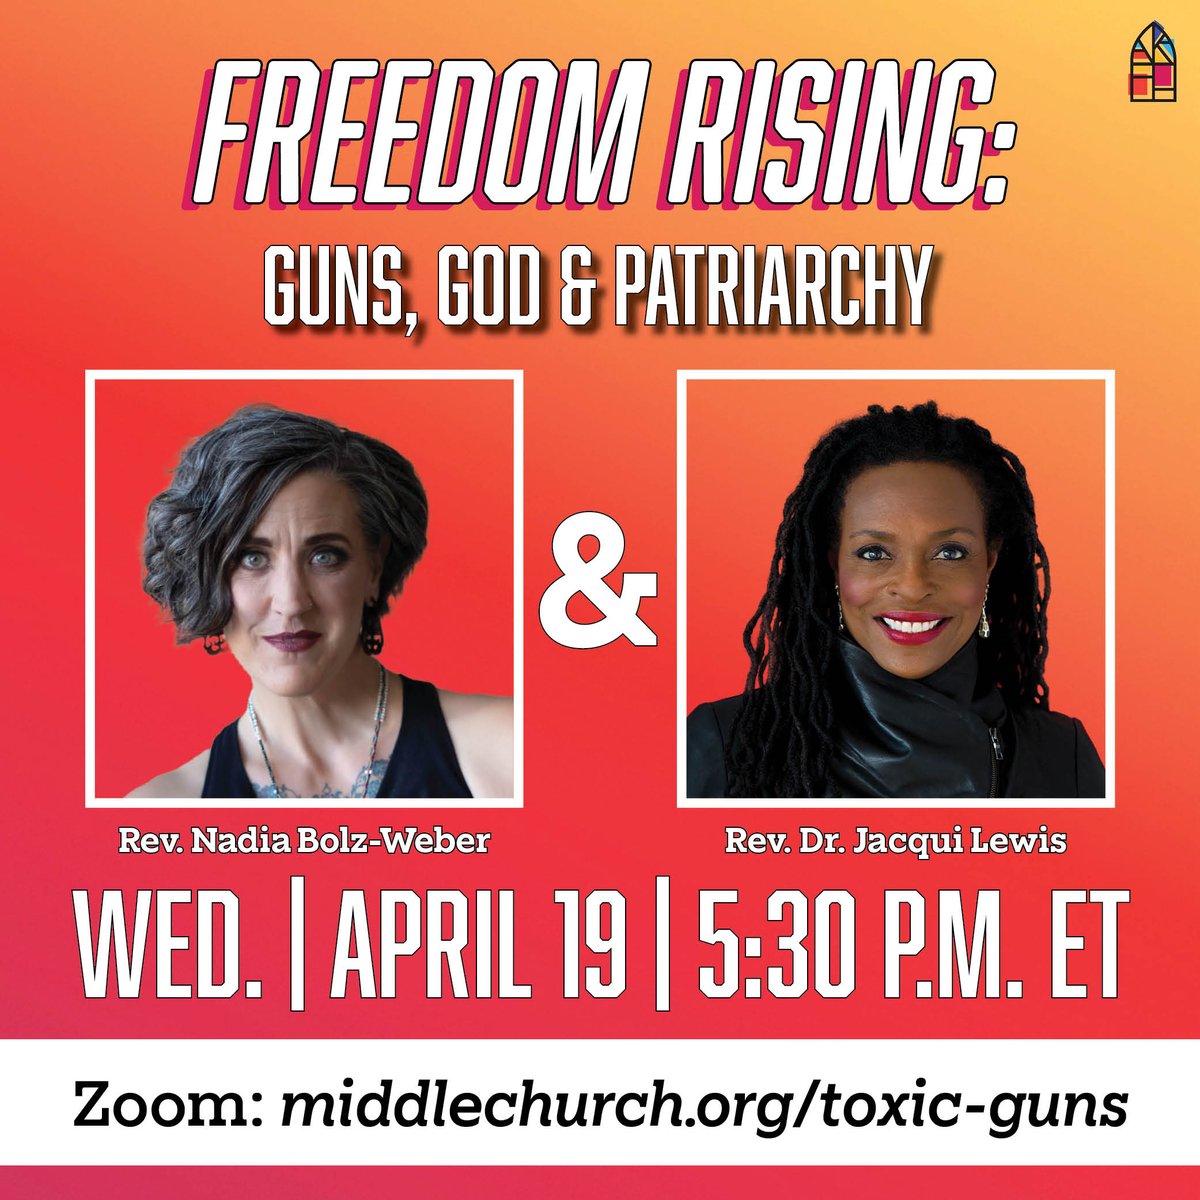 Gun culture cannot be separated from the racism and patriarchy that birthed it. Tonight, I'm talking with @Sarcasticluther about how we got here, and how we get out. Please, join us. Zoom link: middlechurch.org/toxic-guns